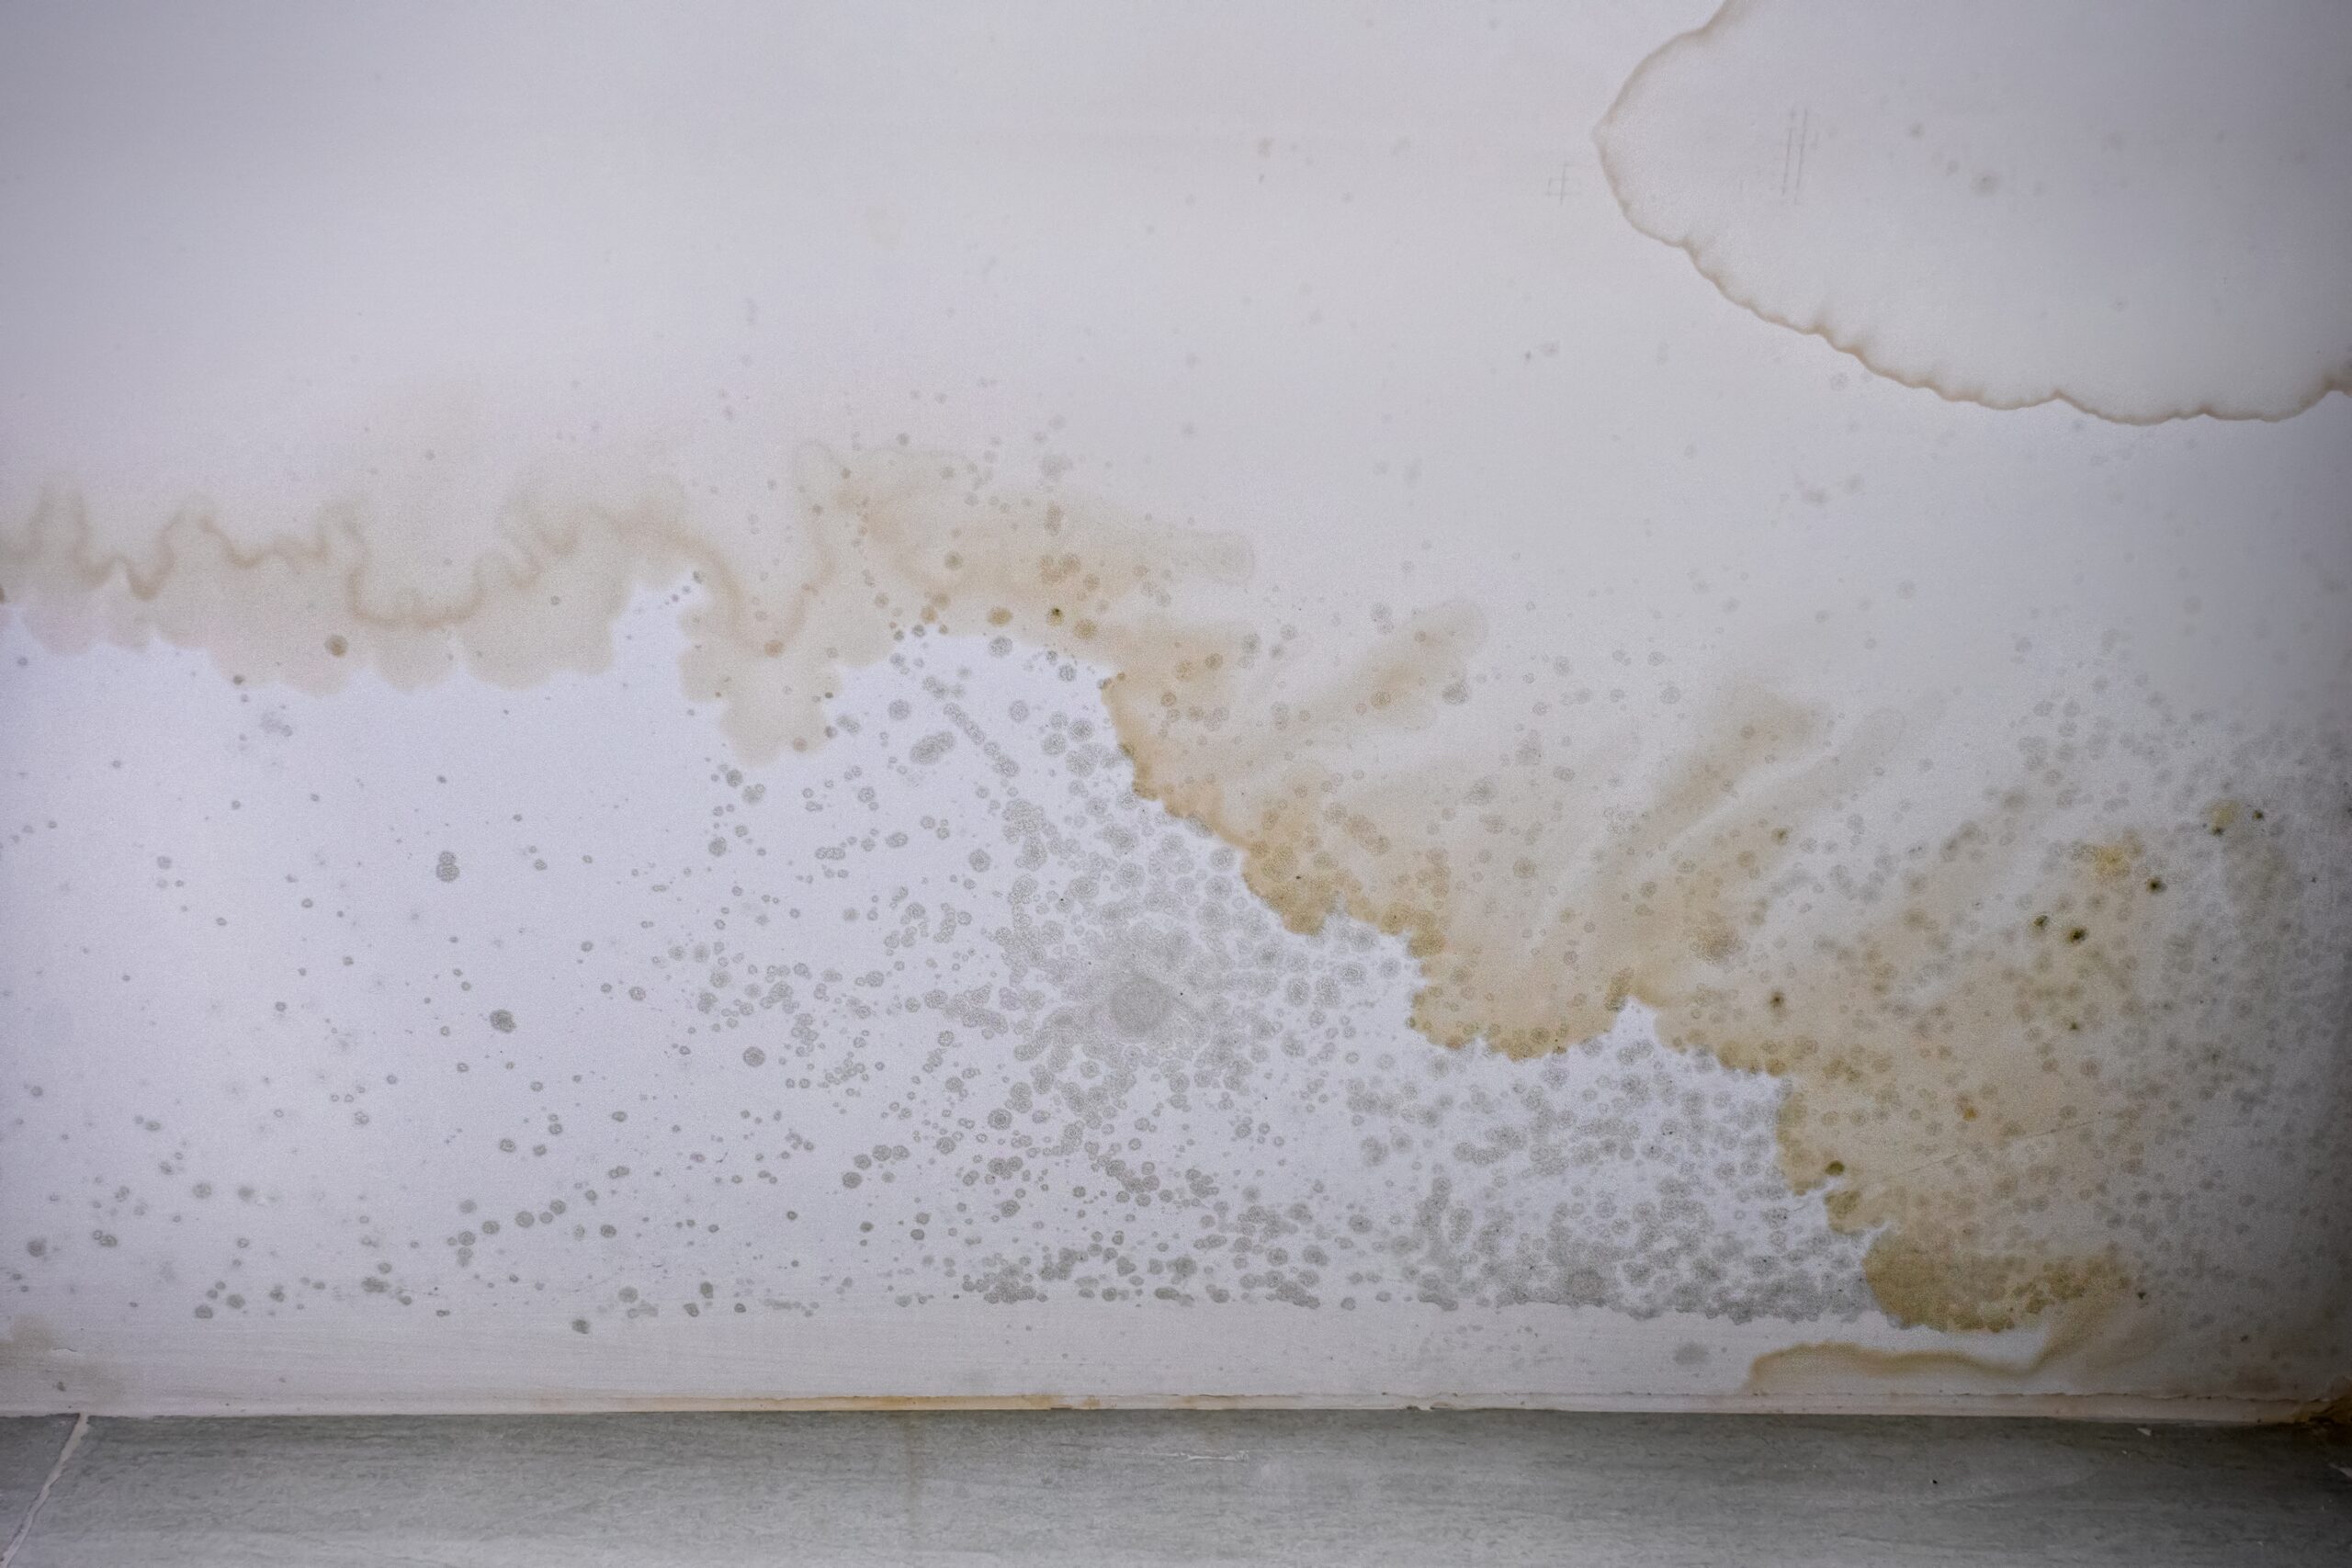 Brown stain of indoor mould and fungus on the ceiling.  Effects of flooding on the wall.